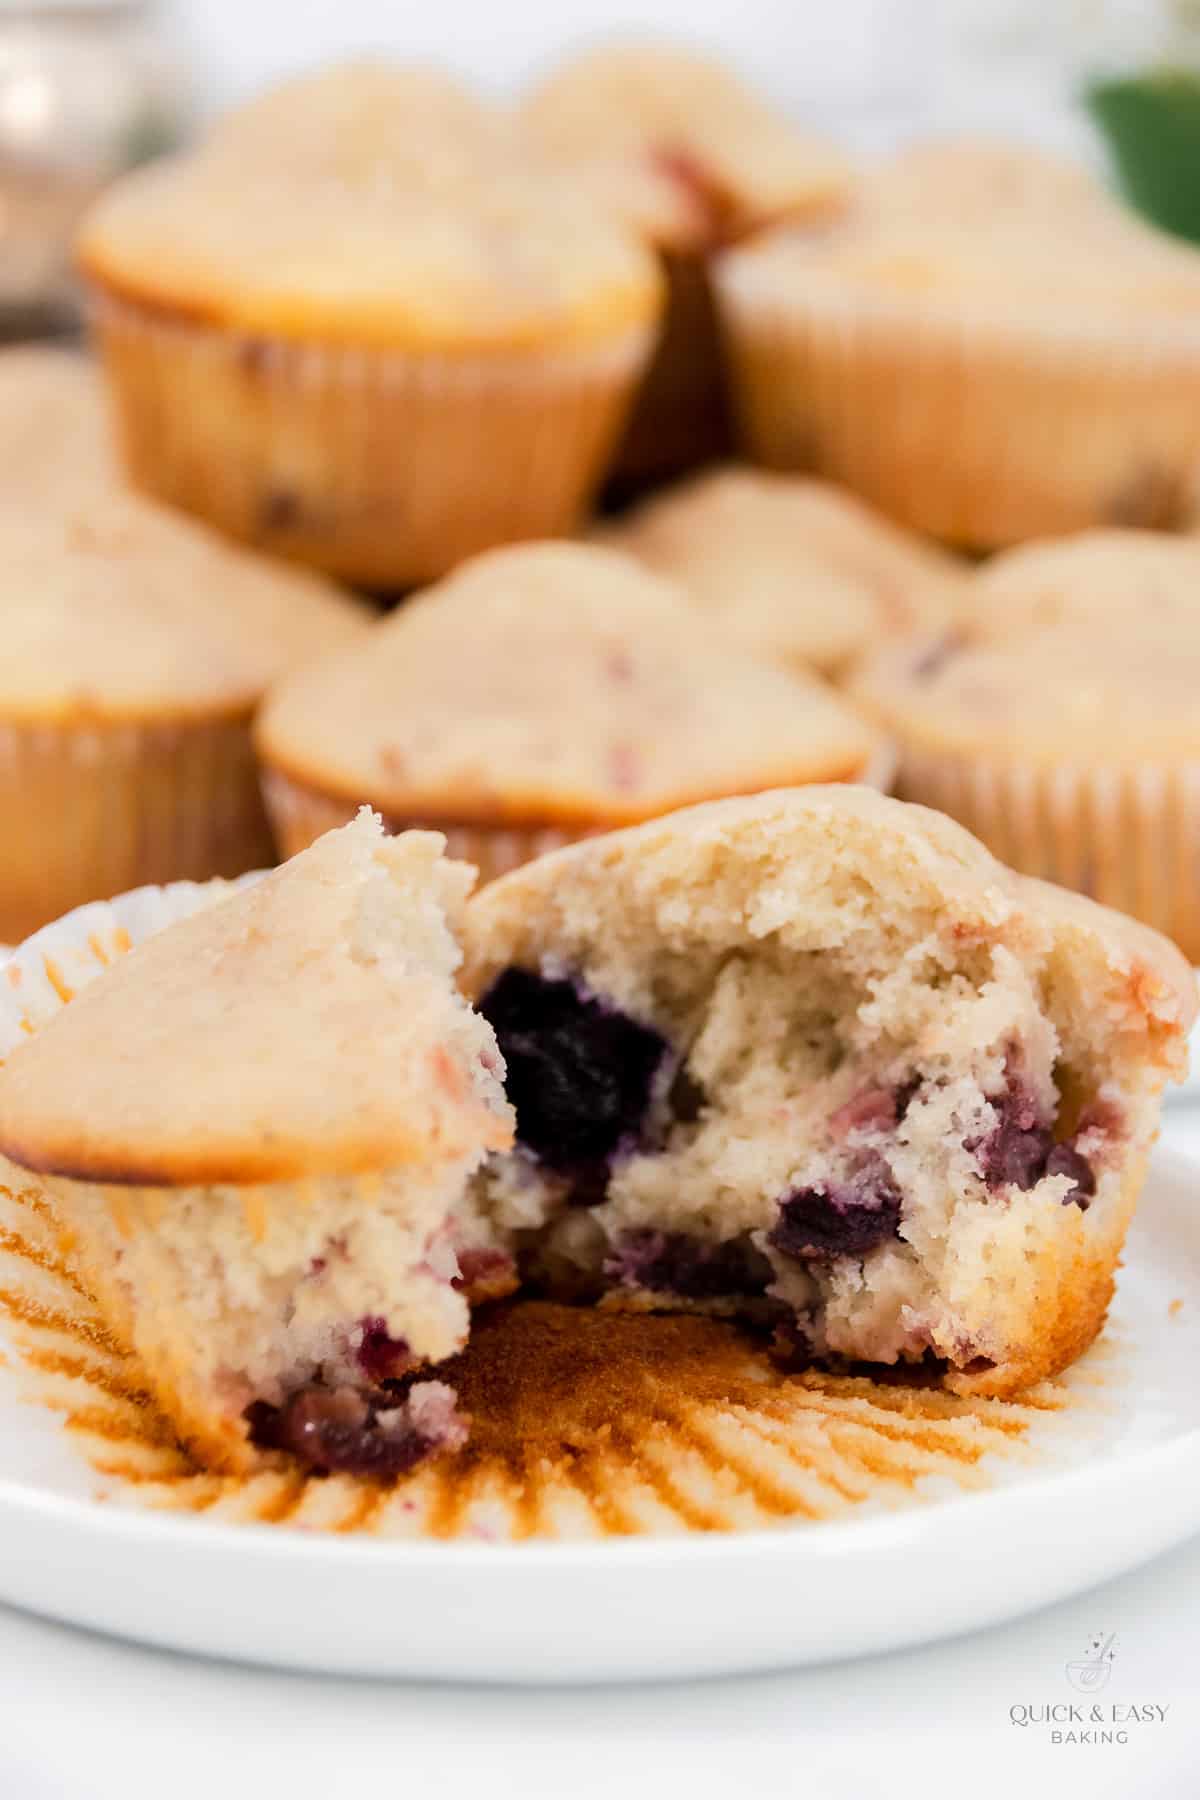 Cut open mixed berry muffin unwrapped on a white plate.